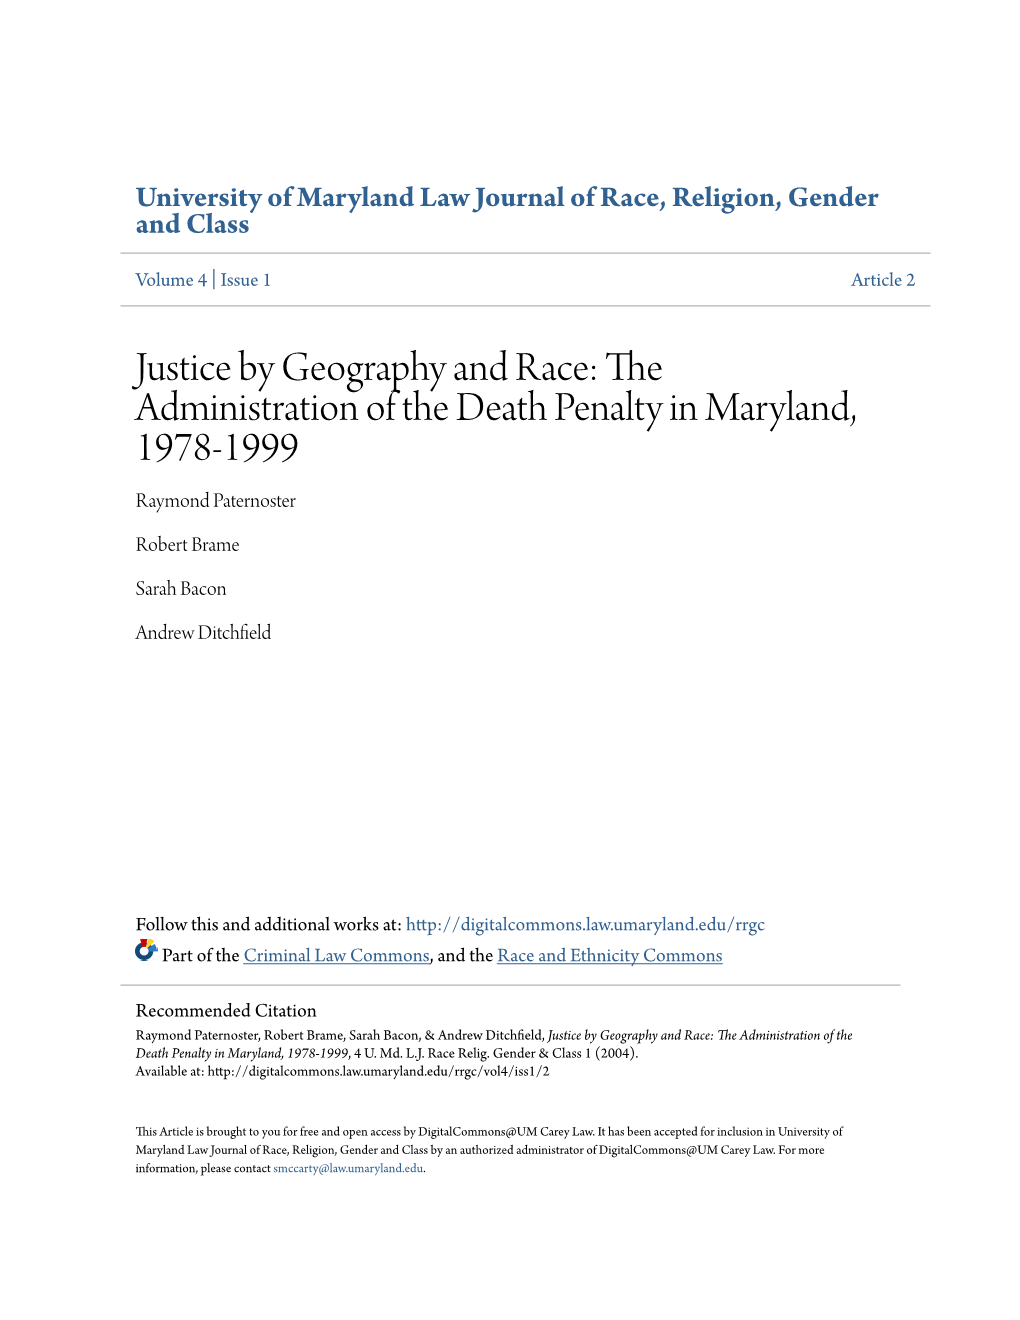 Justice by Geography and Race: the Administration of the Death Penalty in Maryland, 1978-1999 Raymond Paternoster